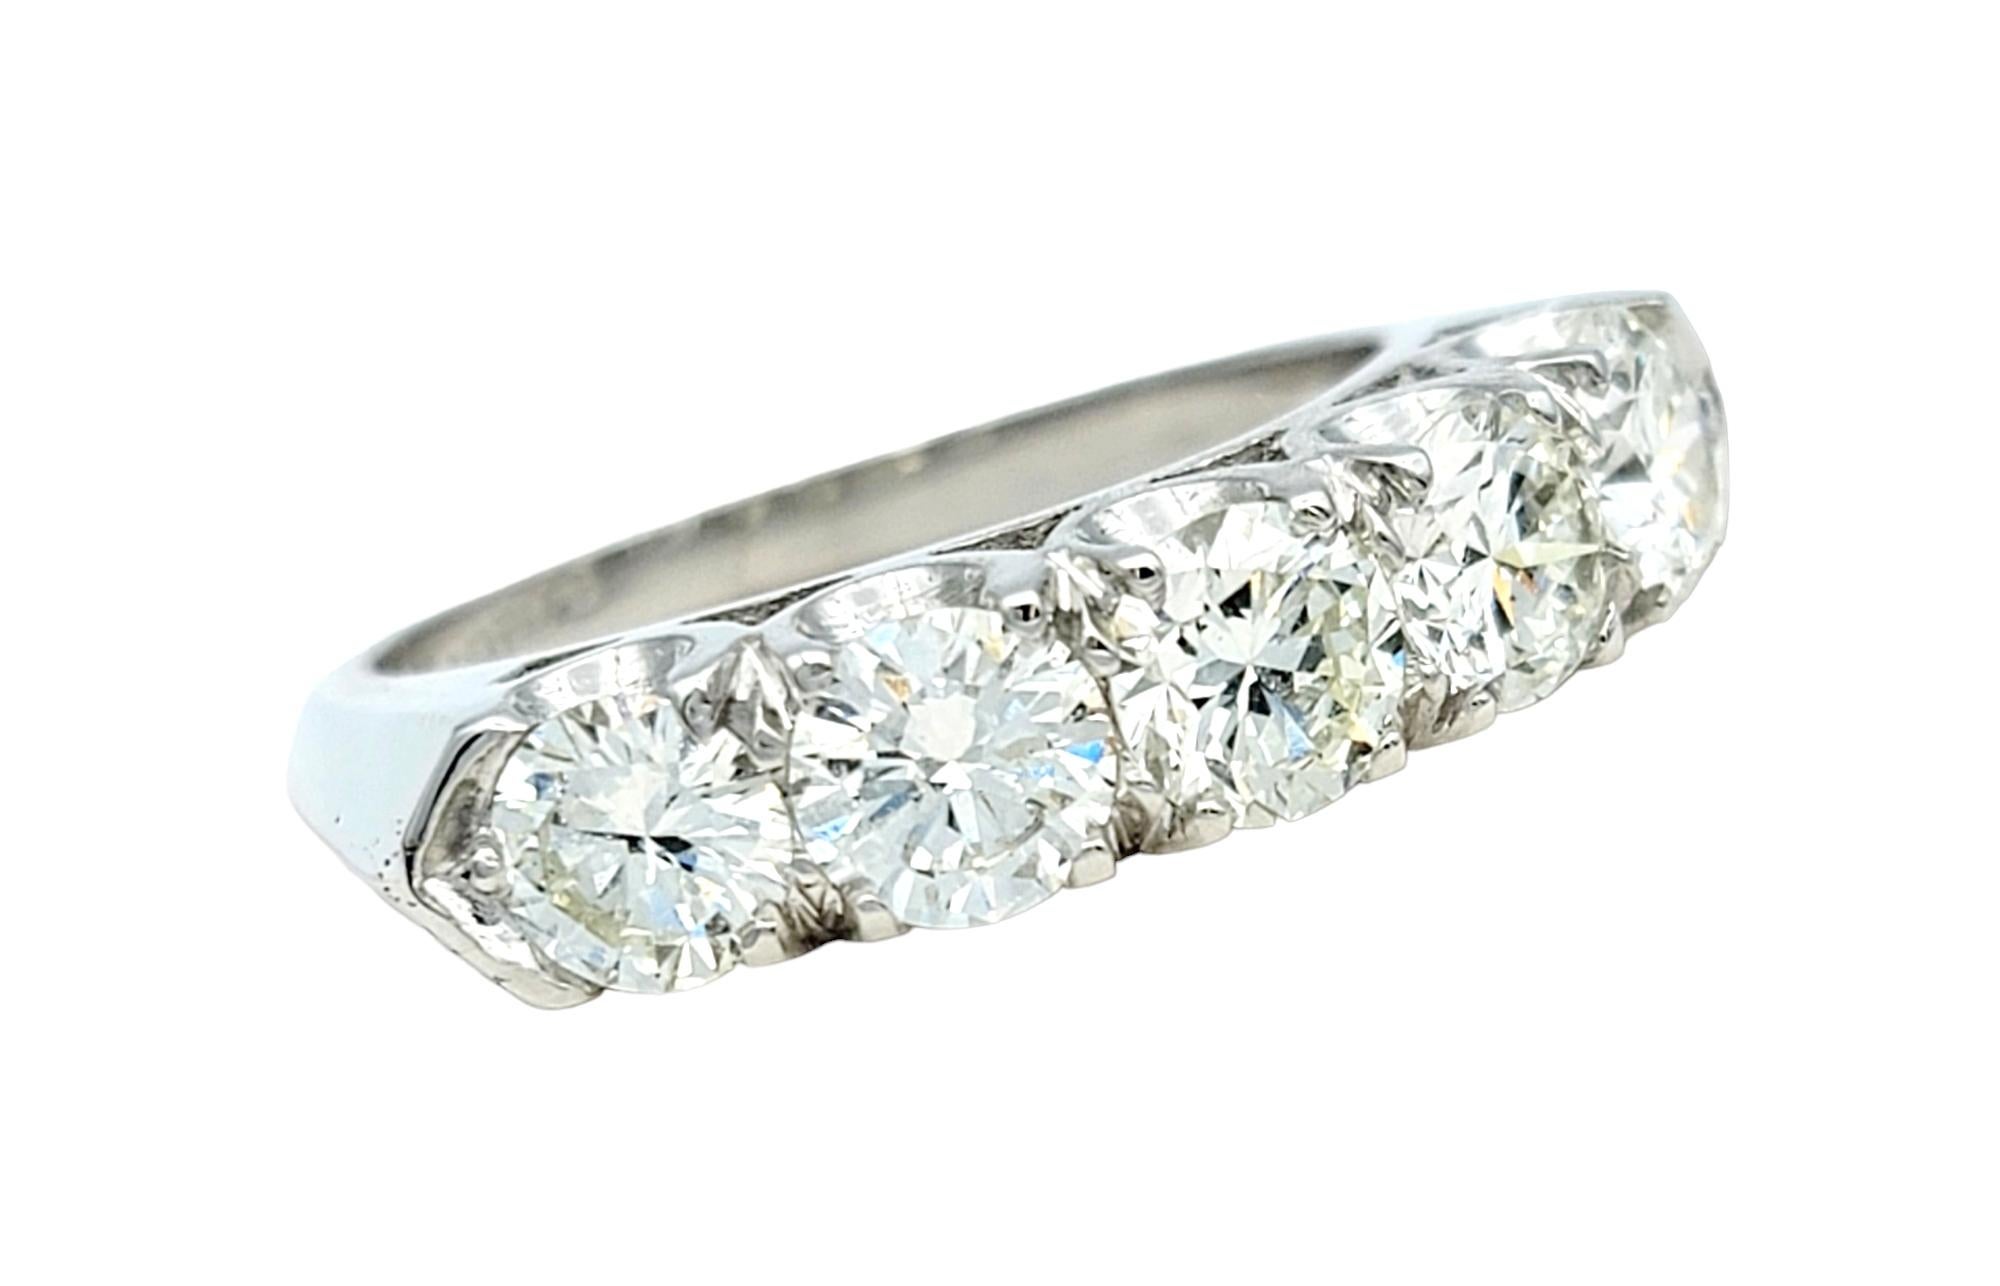 Ring size: 6

This gorgeous platinum and diamond band ring is a striking piece of jewelry. Along the ring, five exquisite stones are elegantly set, creating an impressive luxurious sparkle. This ring effortlessly combines modern style with timeless